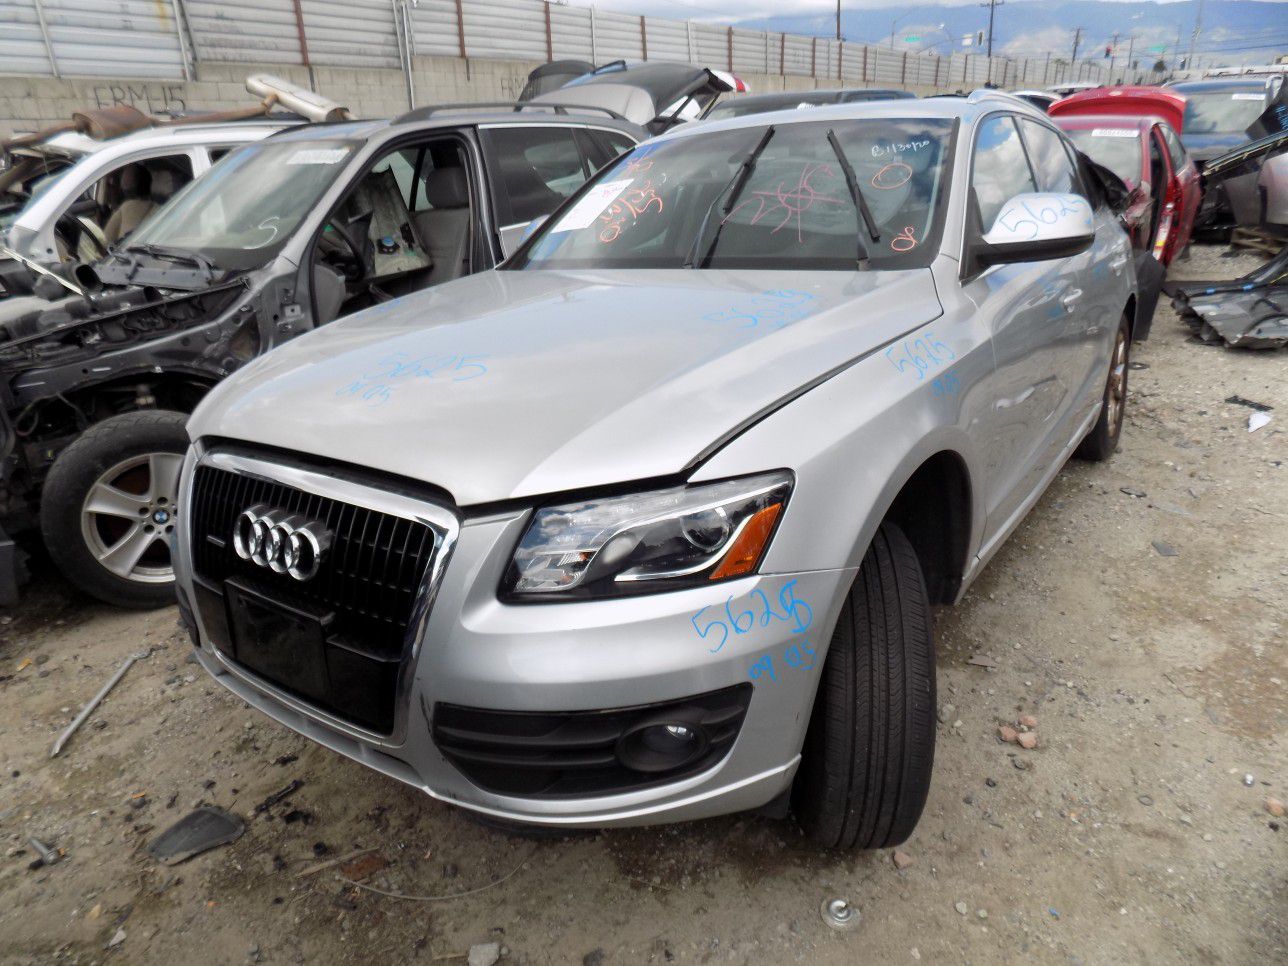 2009 Audi Q5 3.2 L (Parting Out) STOCK # 5625